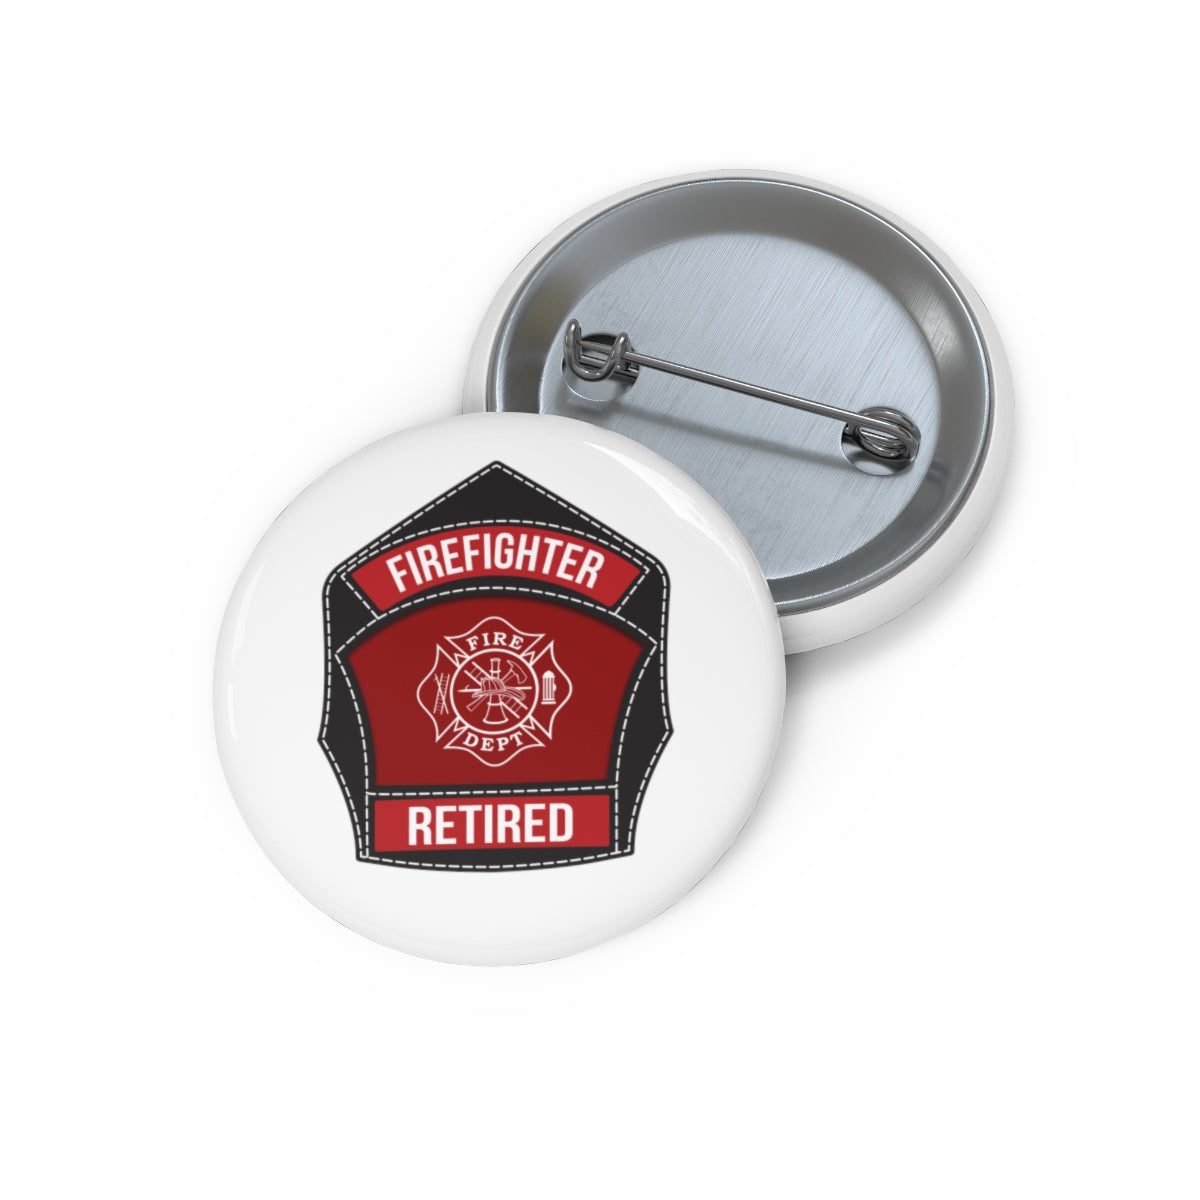 Retired Firefighter Round Pin Buttons - firestationstore.com - Accessories